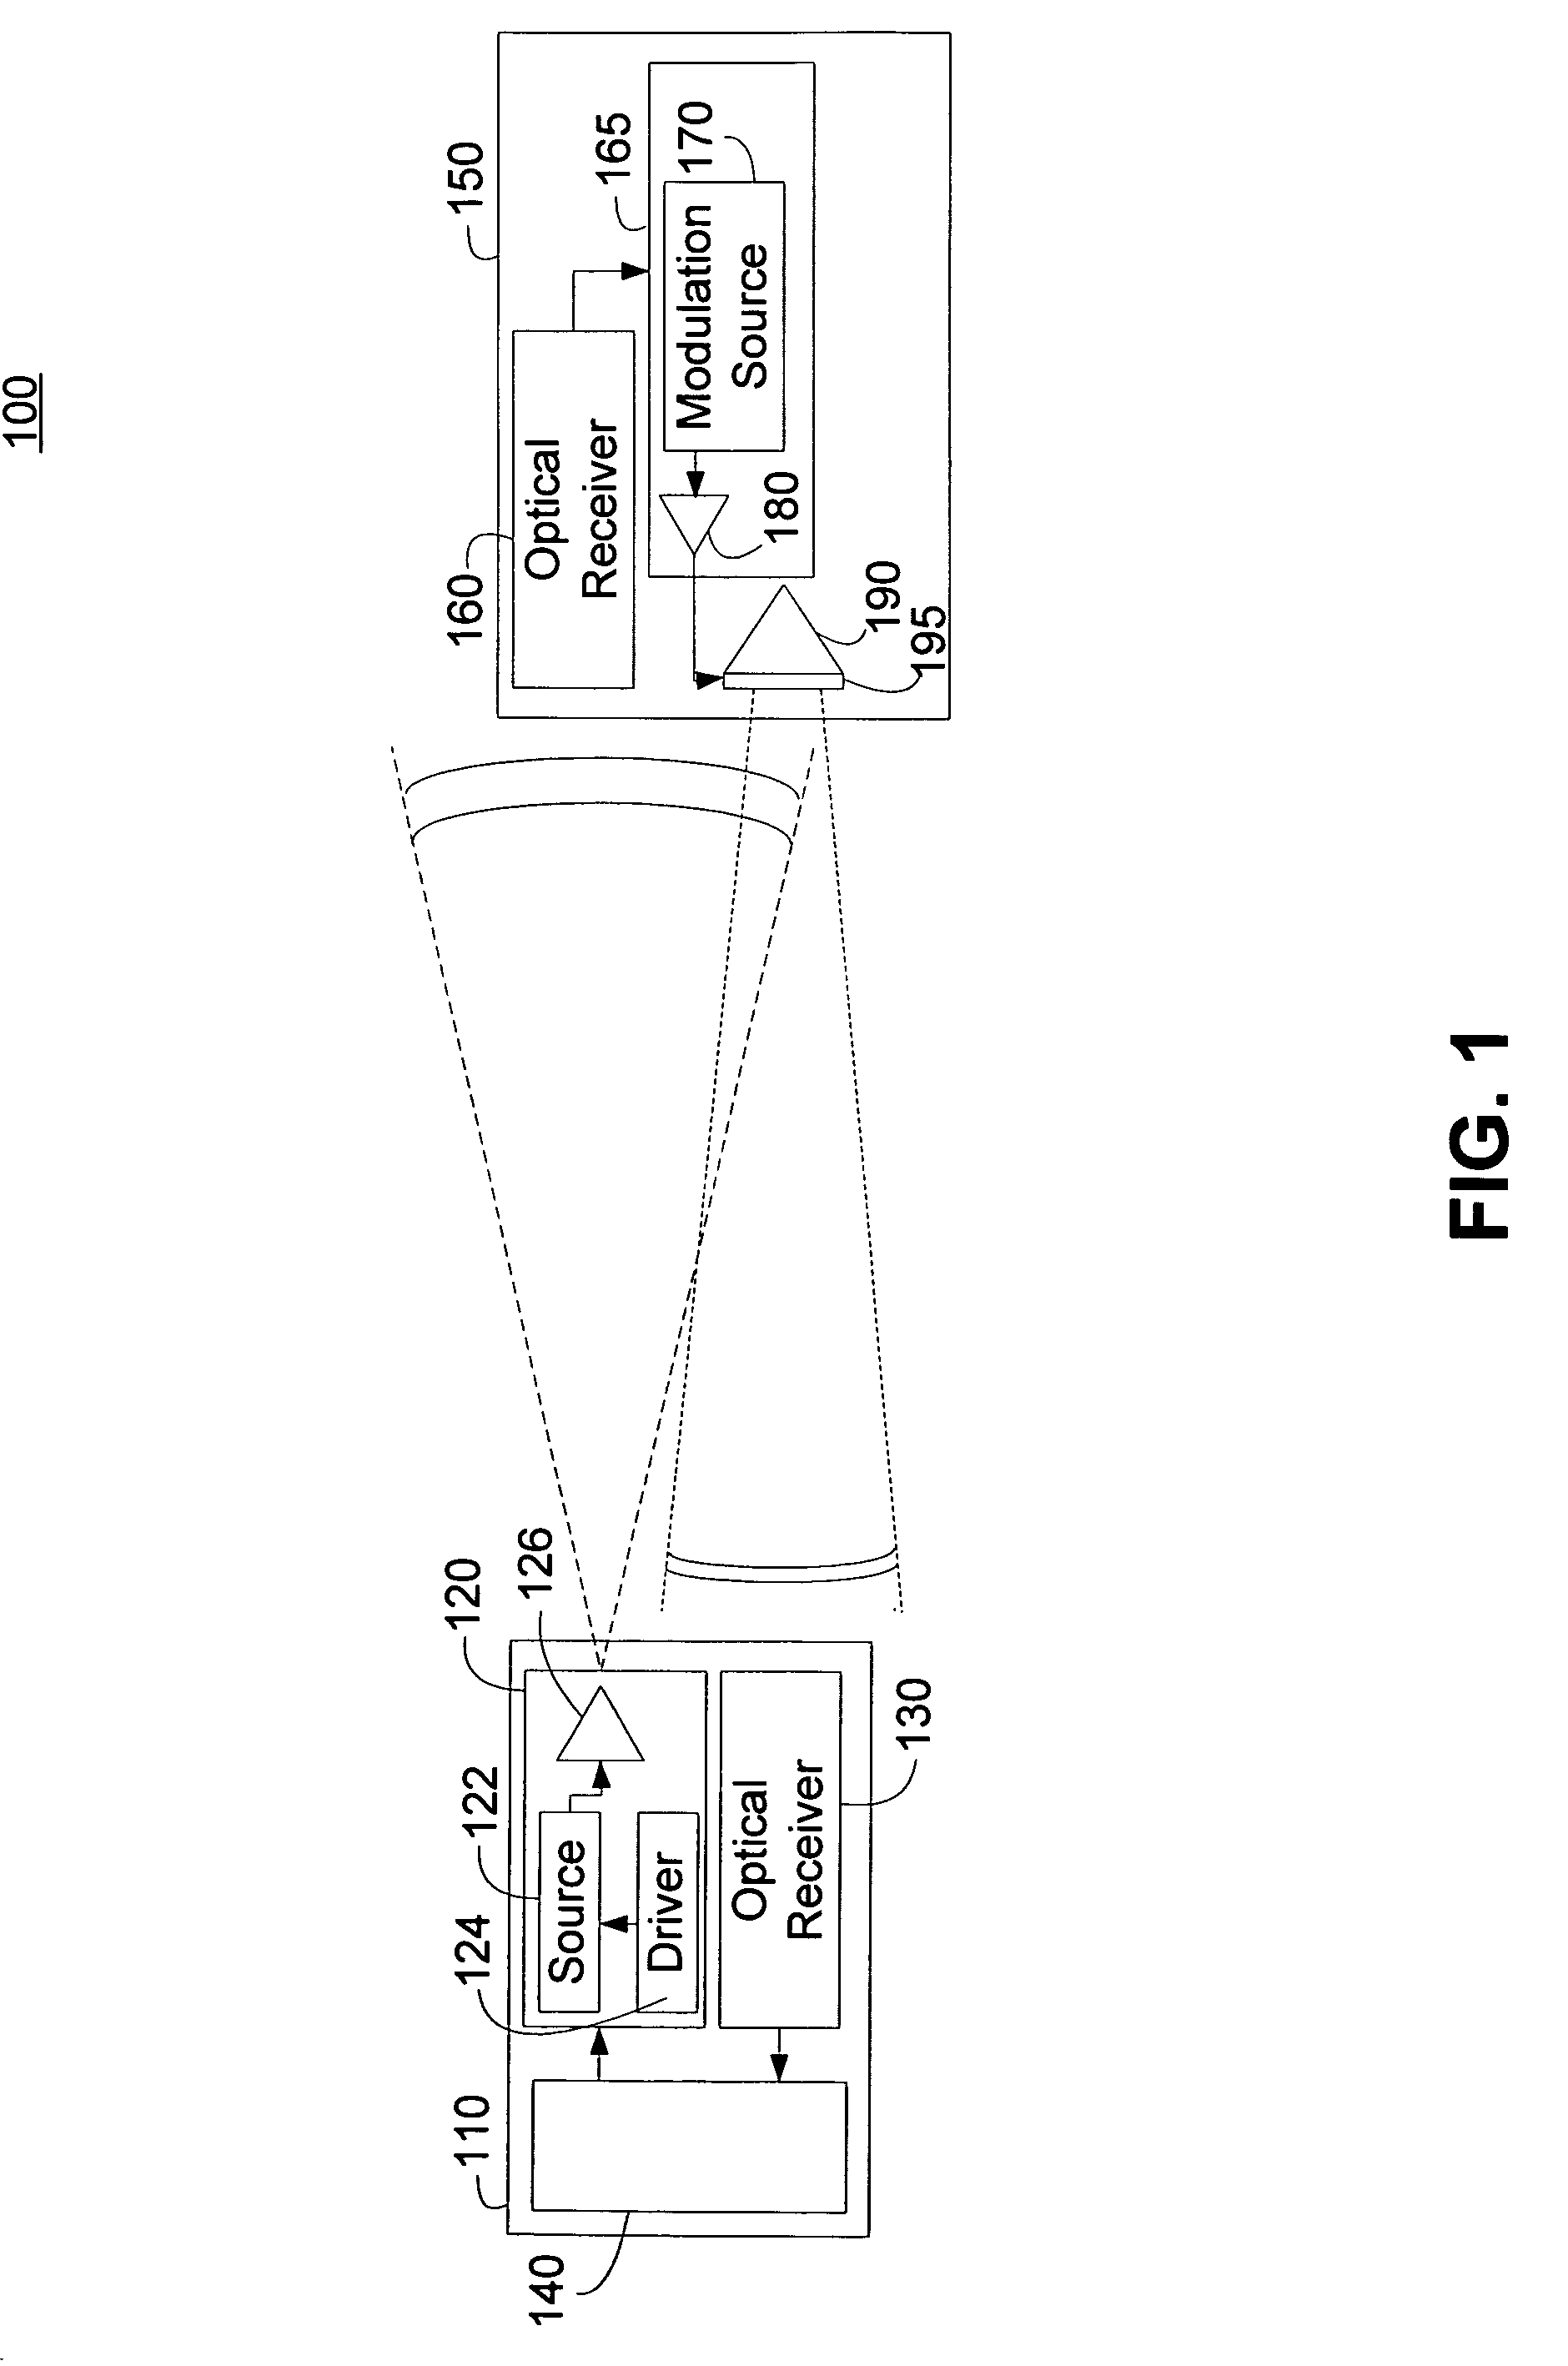 Temperature compensated dynamic optical tag modulator system and method